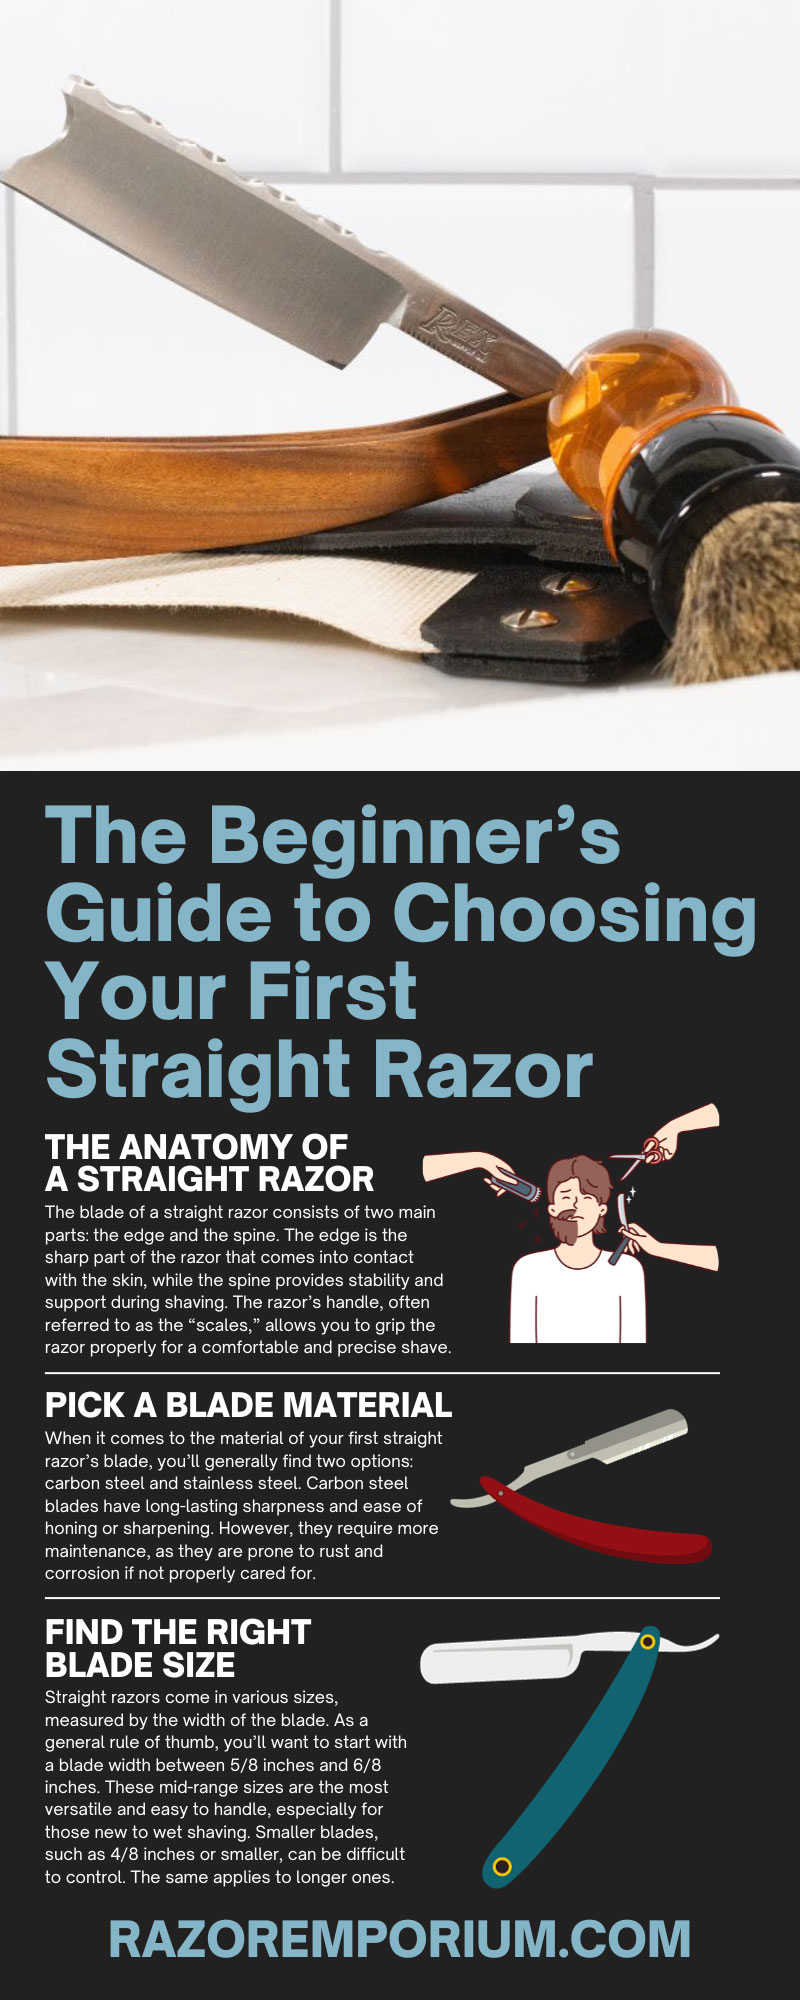 The Beginner’s Guide to Choosing Your First Straight Razor